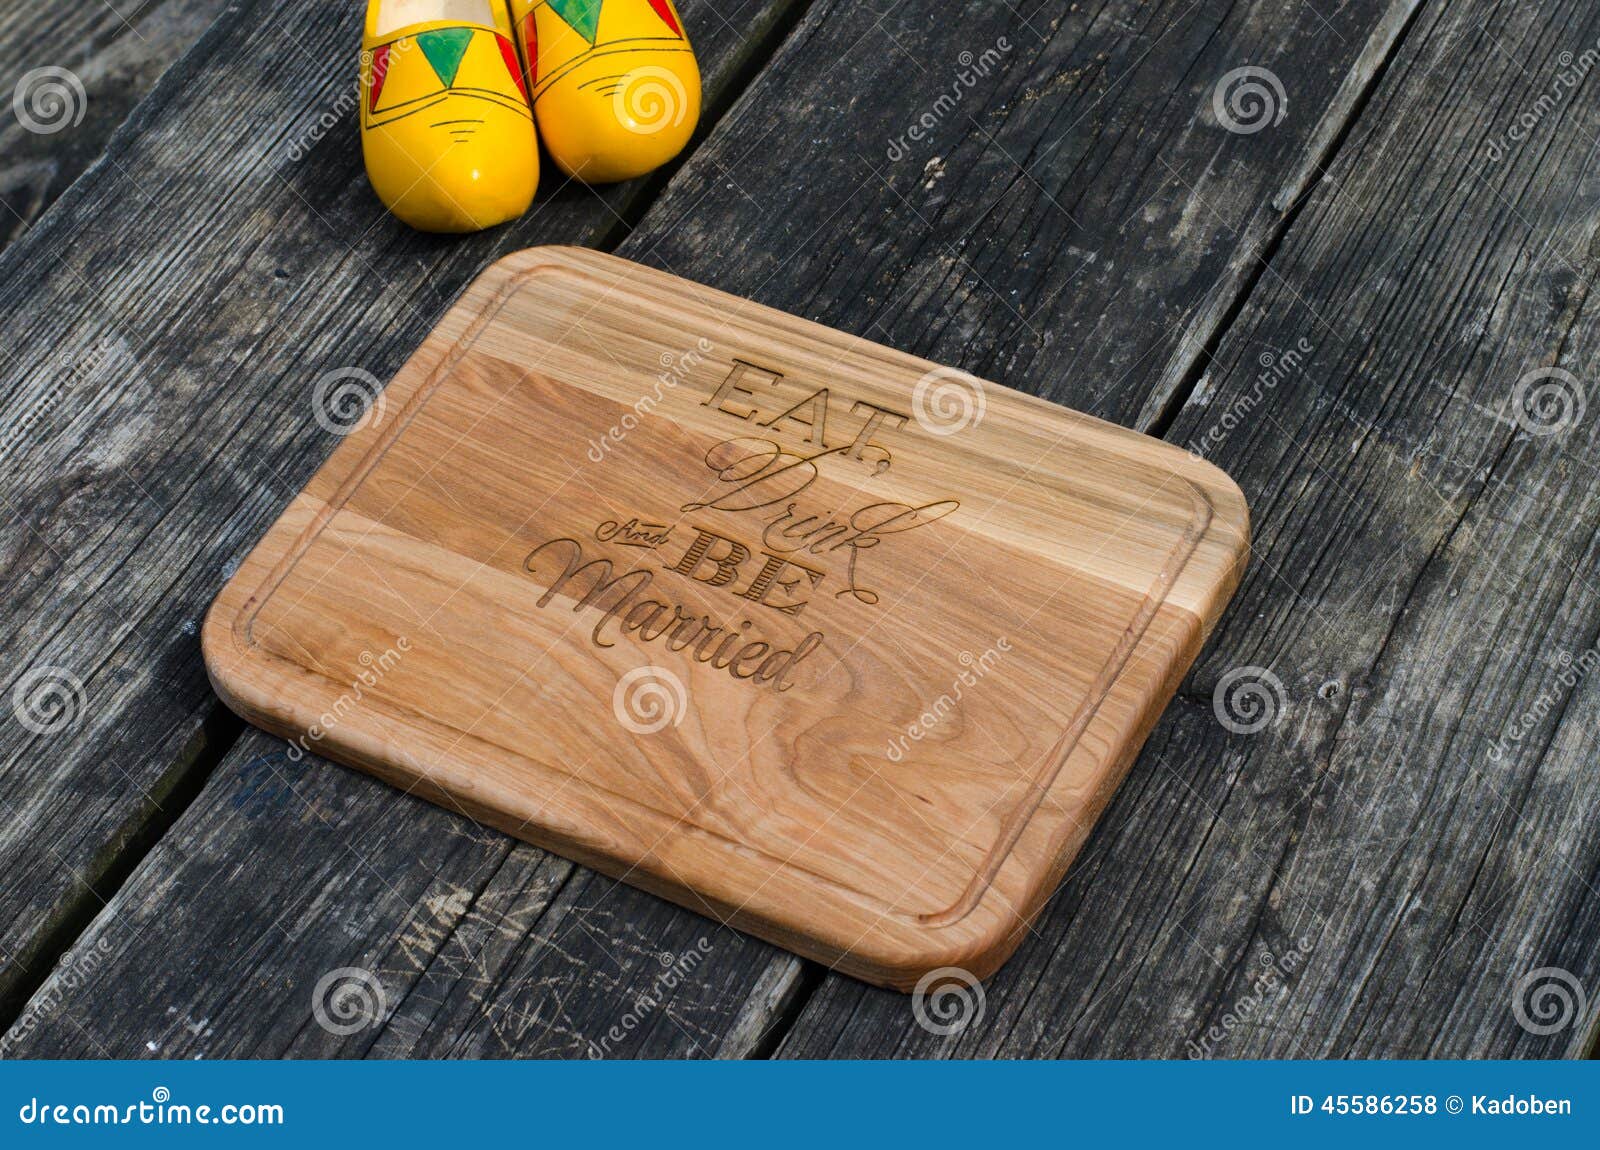 eat drink and be married wood cutting board